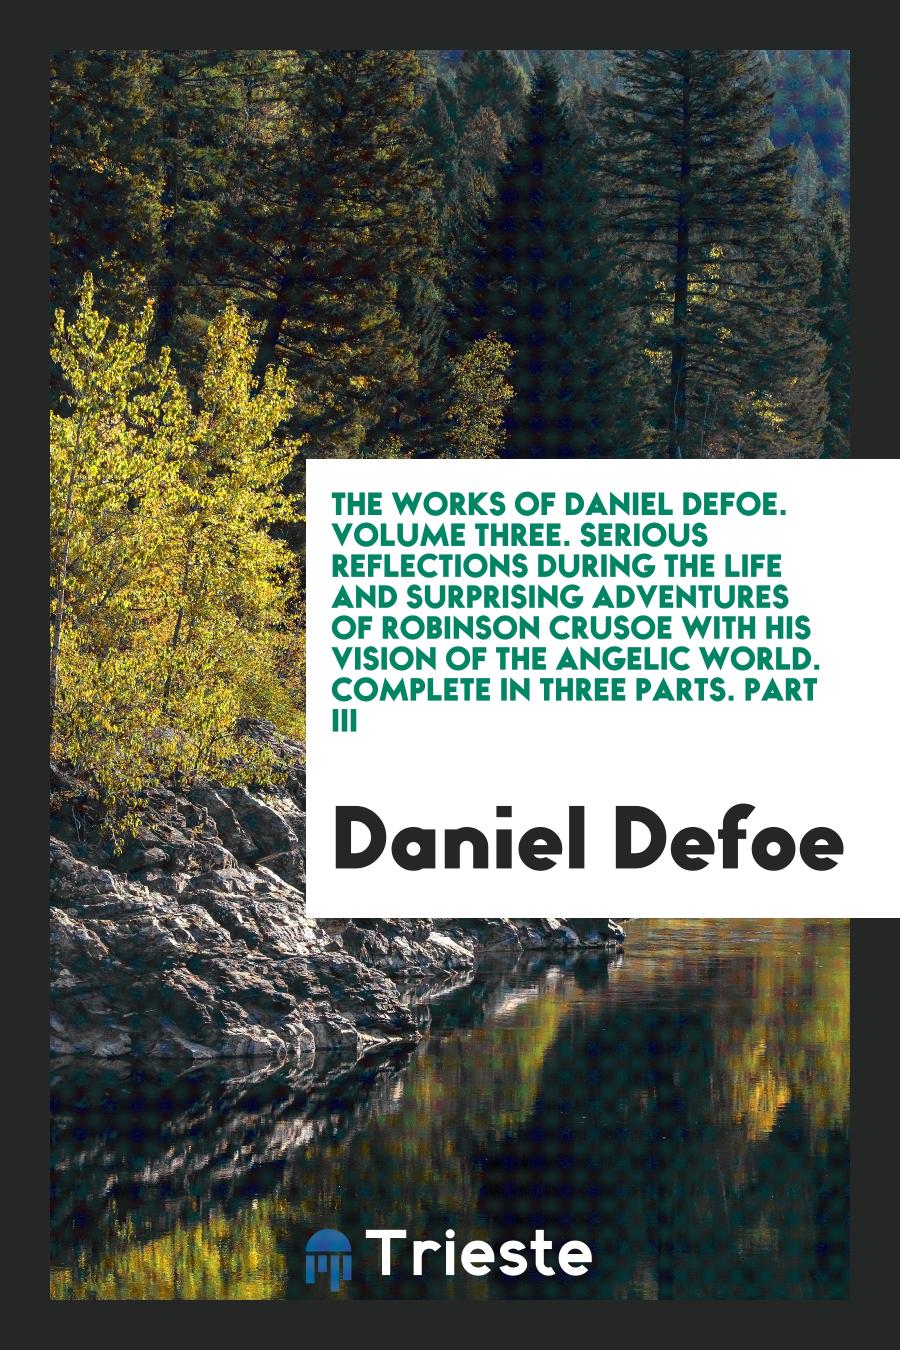 The Works of Daniel Defoe. Volume Three. Serious Reflections During the Life and Surprising Adventures of Robinson Crusoe with His Vision of the Angelic World. Complete in Three Parts. Part III